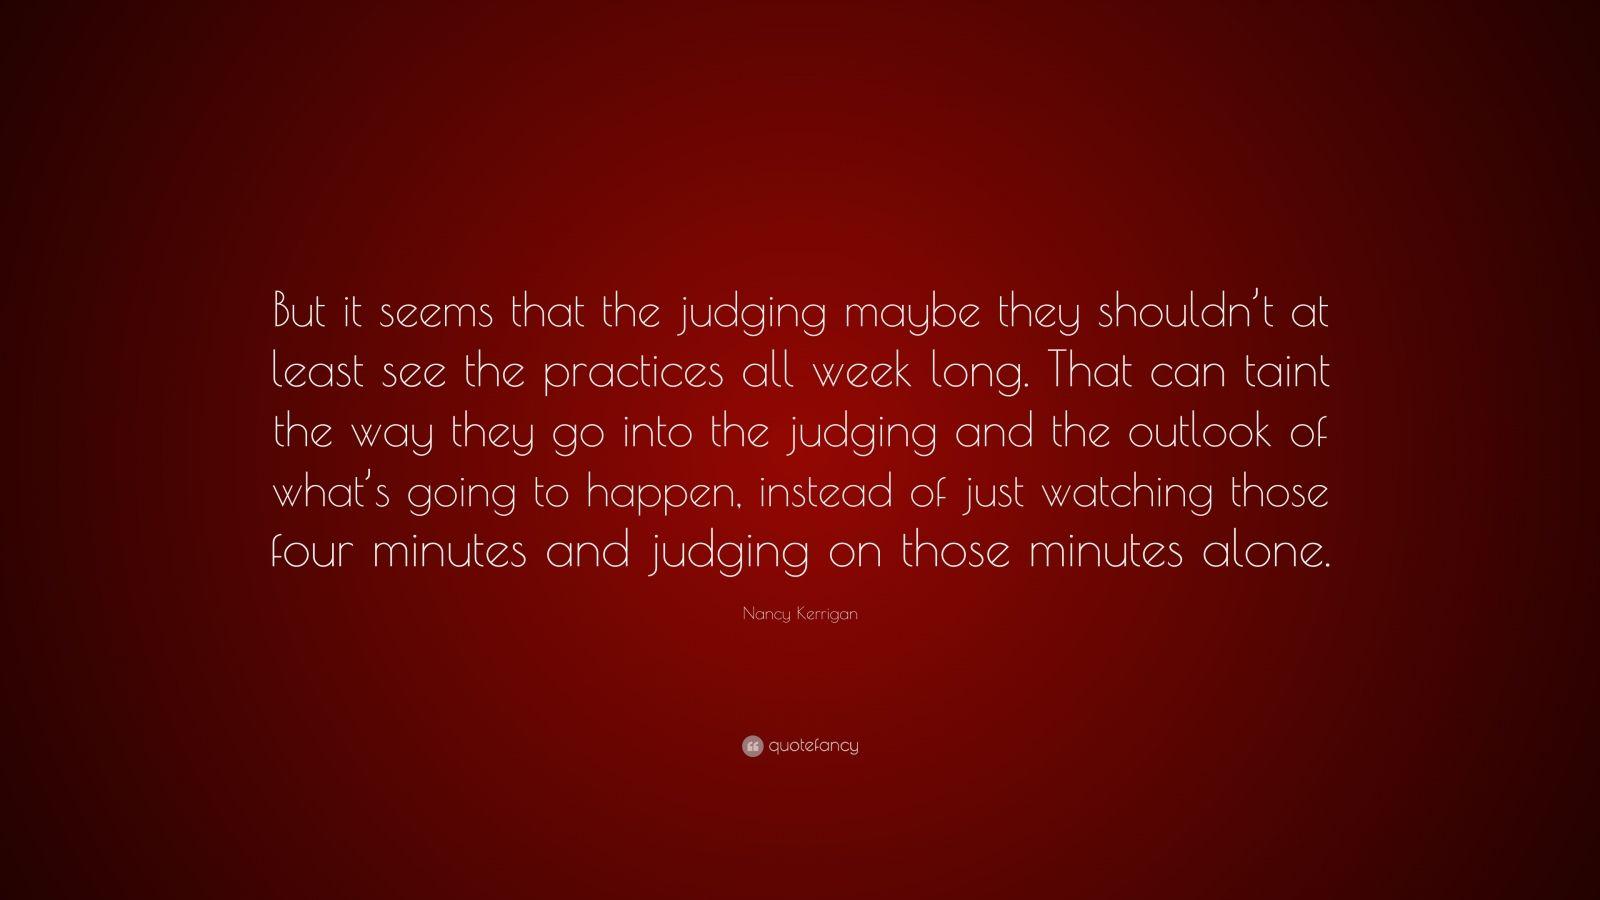 Nancy Kerrigan Quote: “But it seems that the judging maybe they